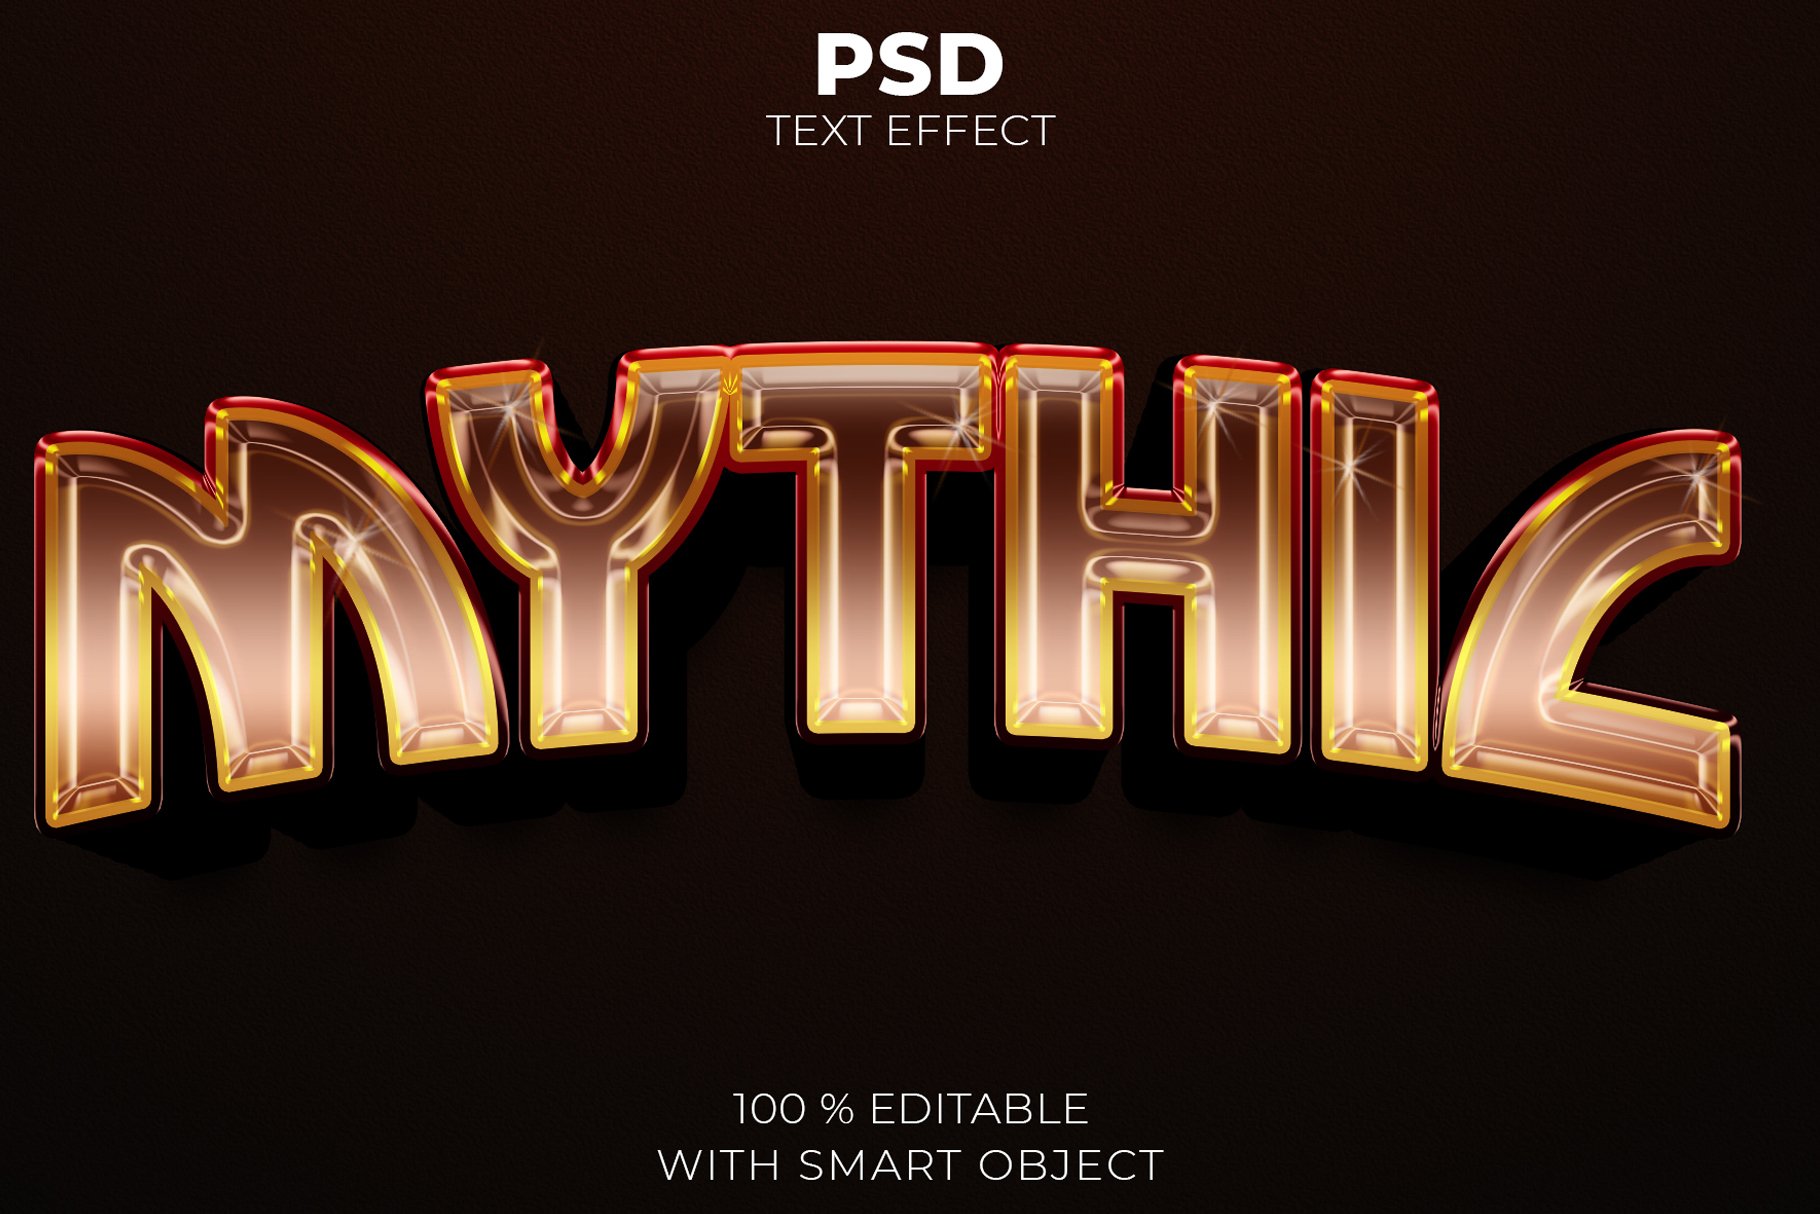 Mythic 3D editable text effectcover image.